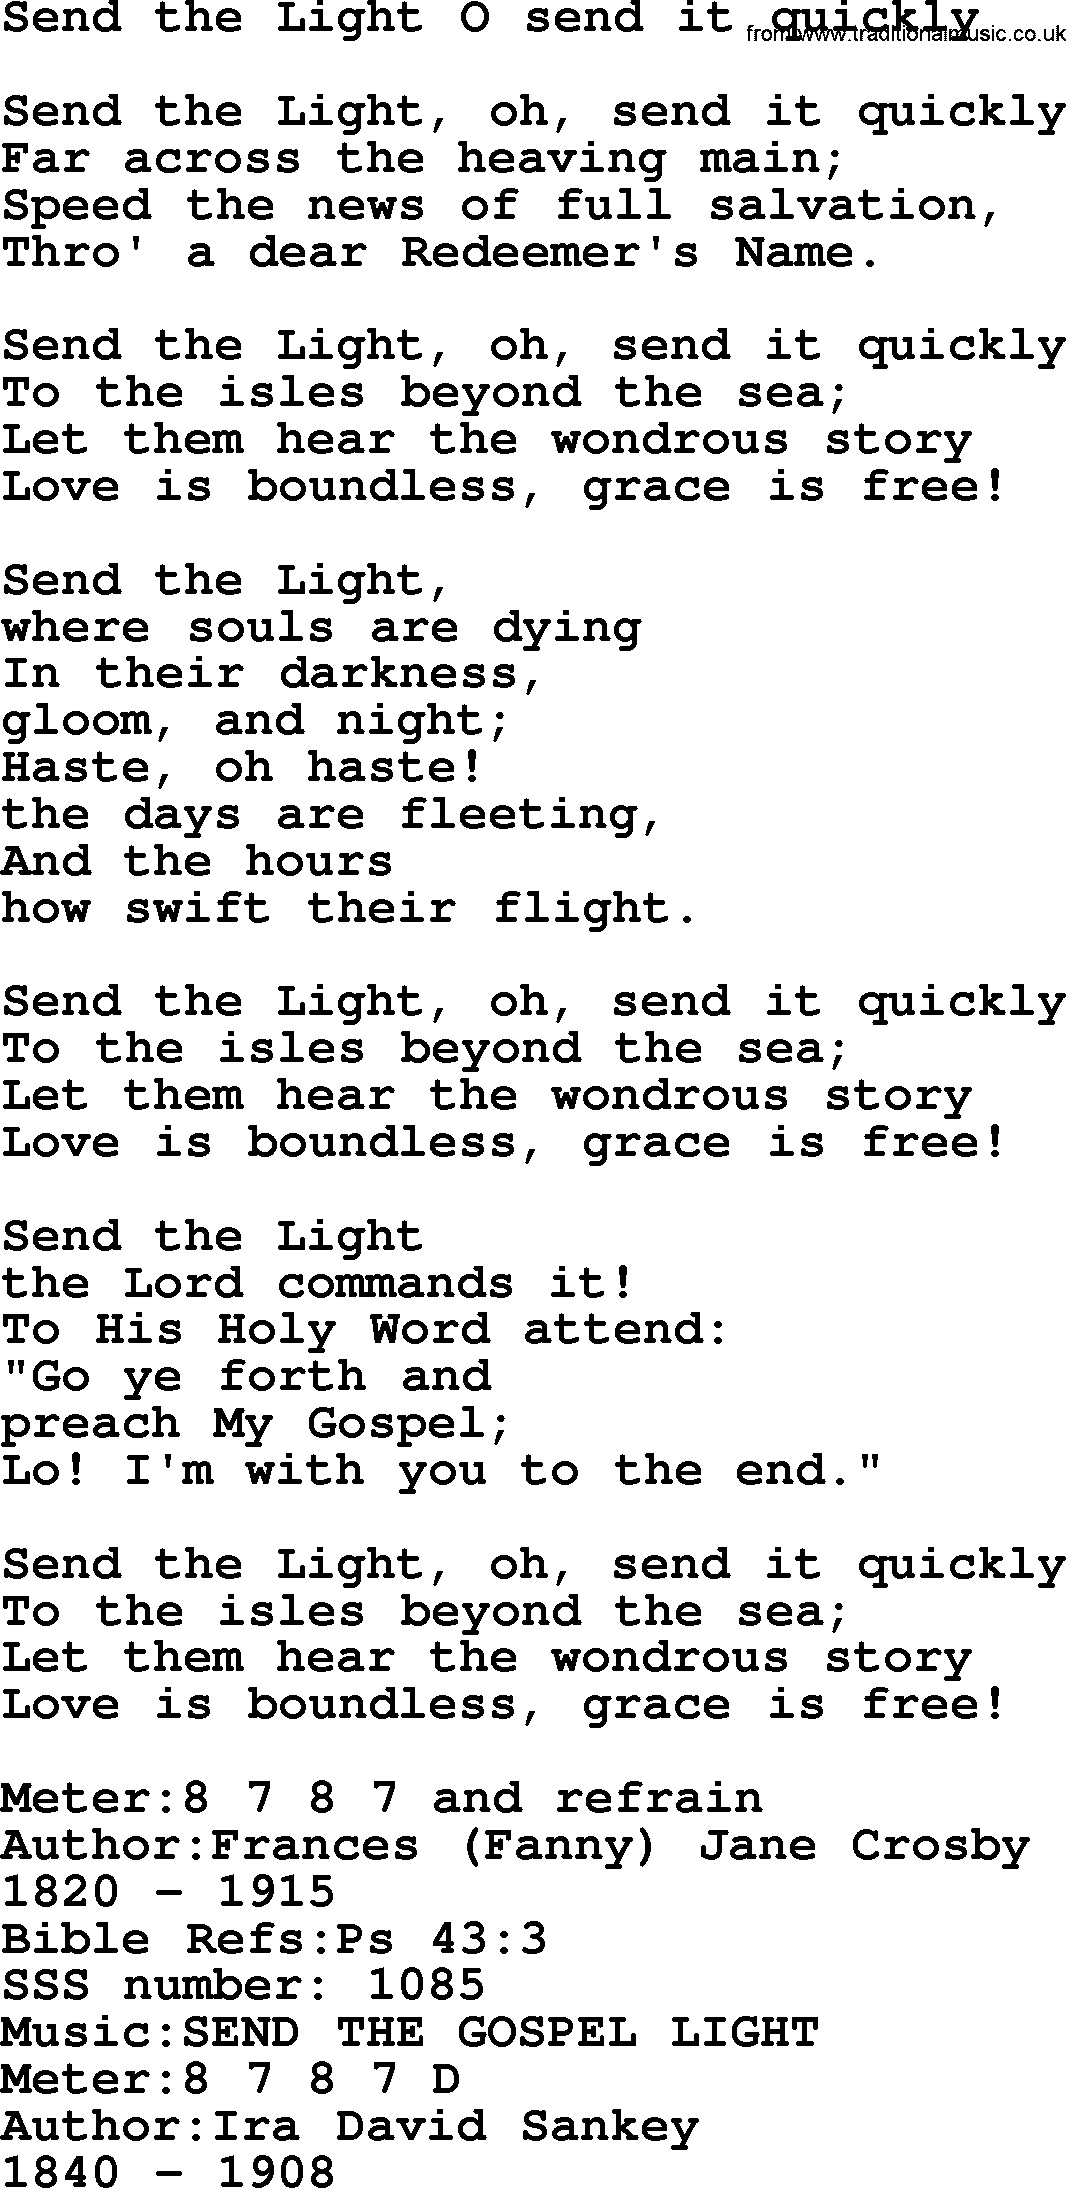 Sacred Songs and Solos complete, 1200 Hymns, title: Send The Light O Send It Quickly, lyrics and PDF